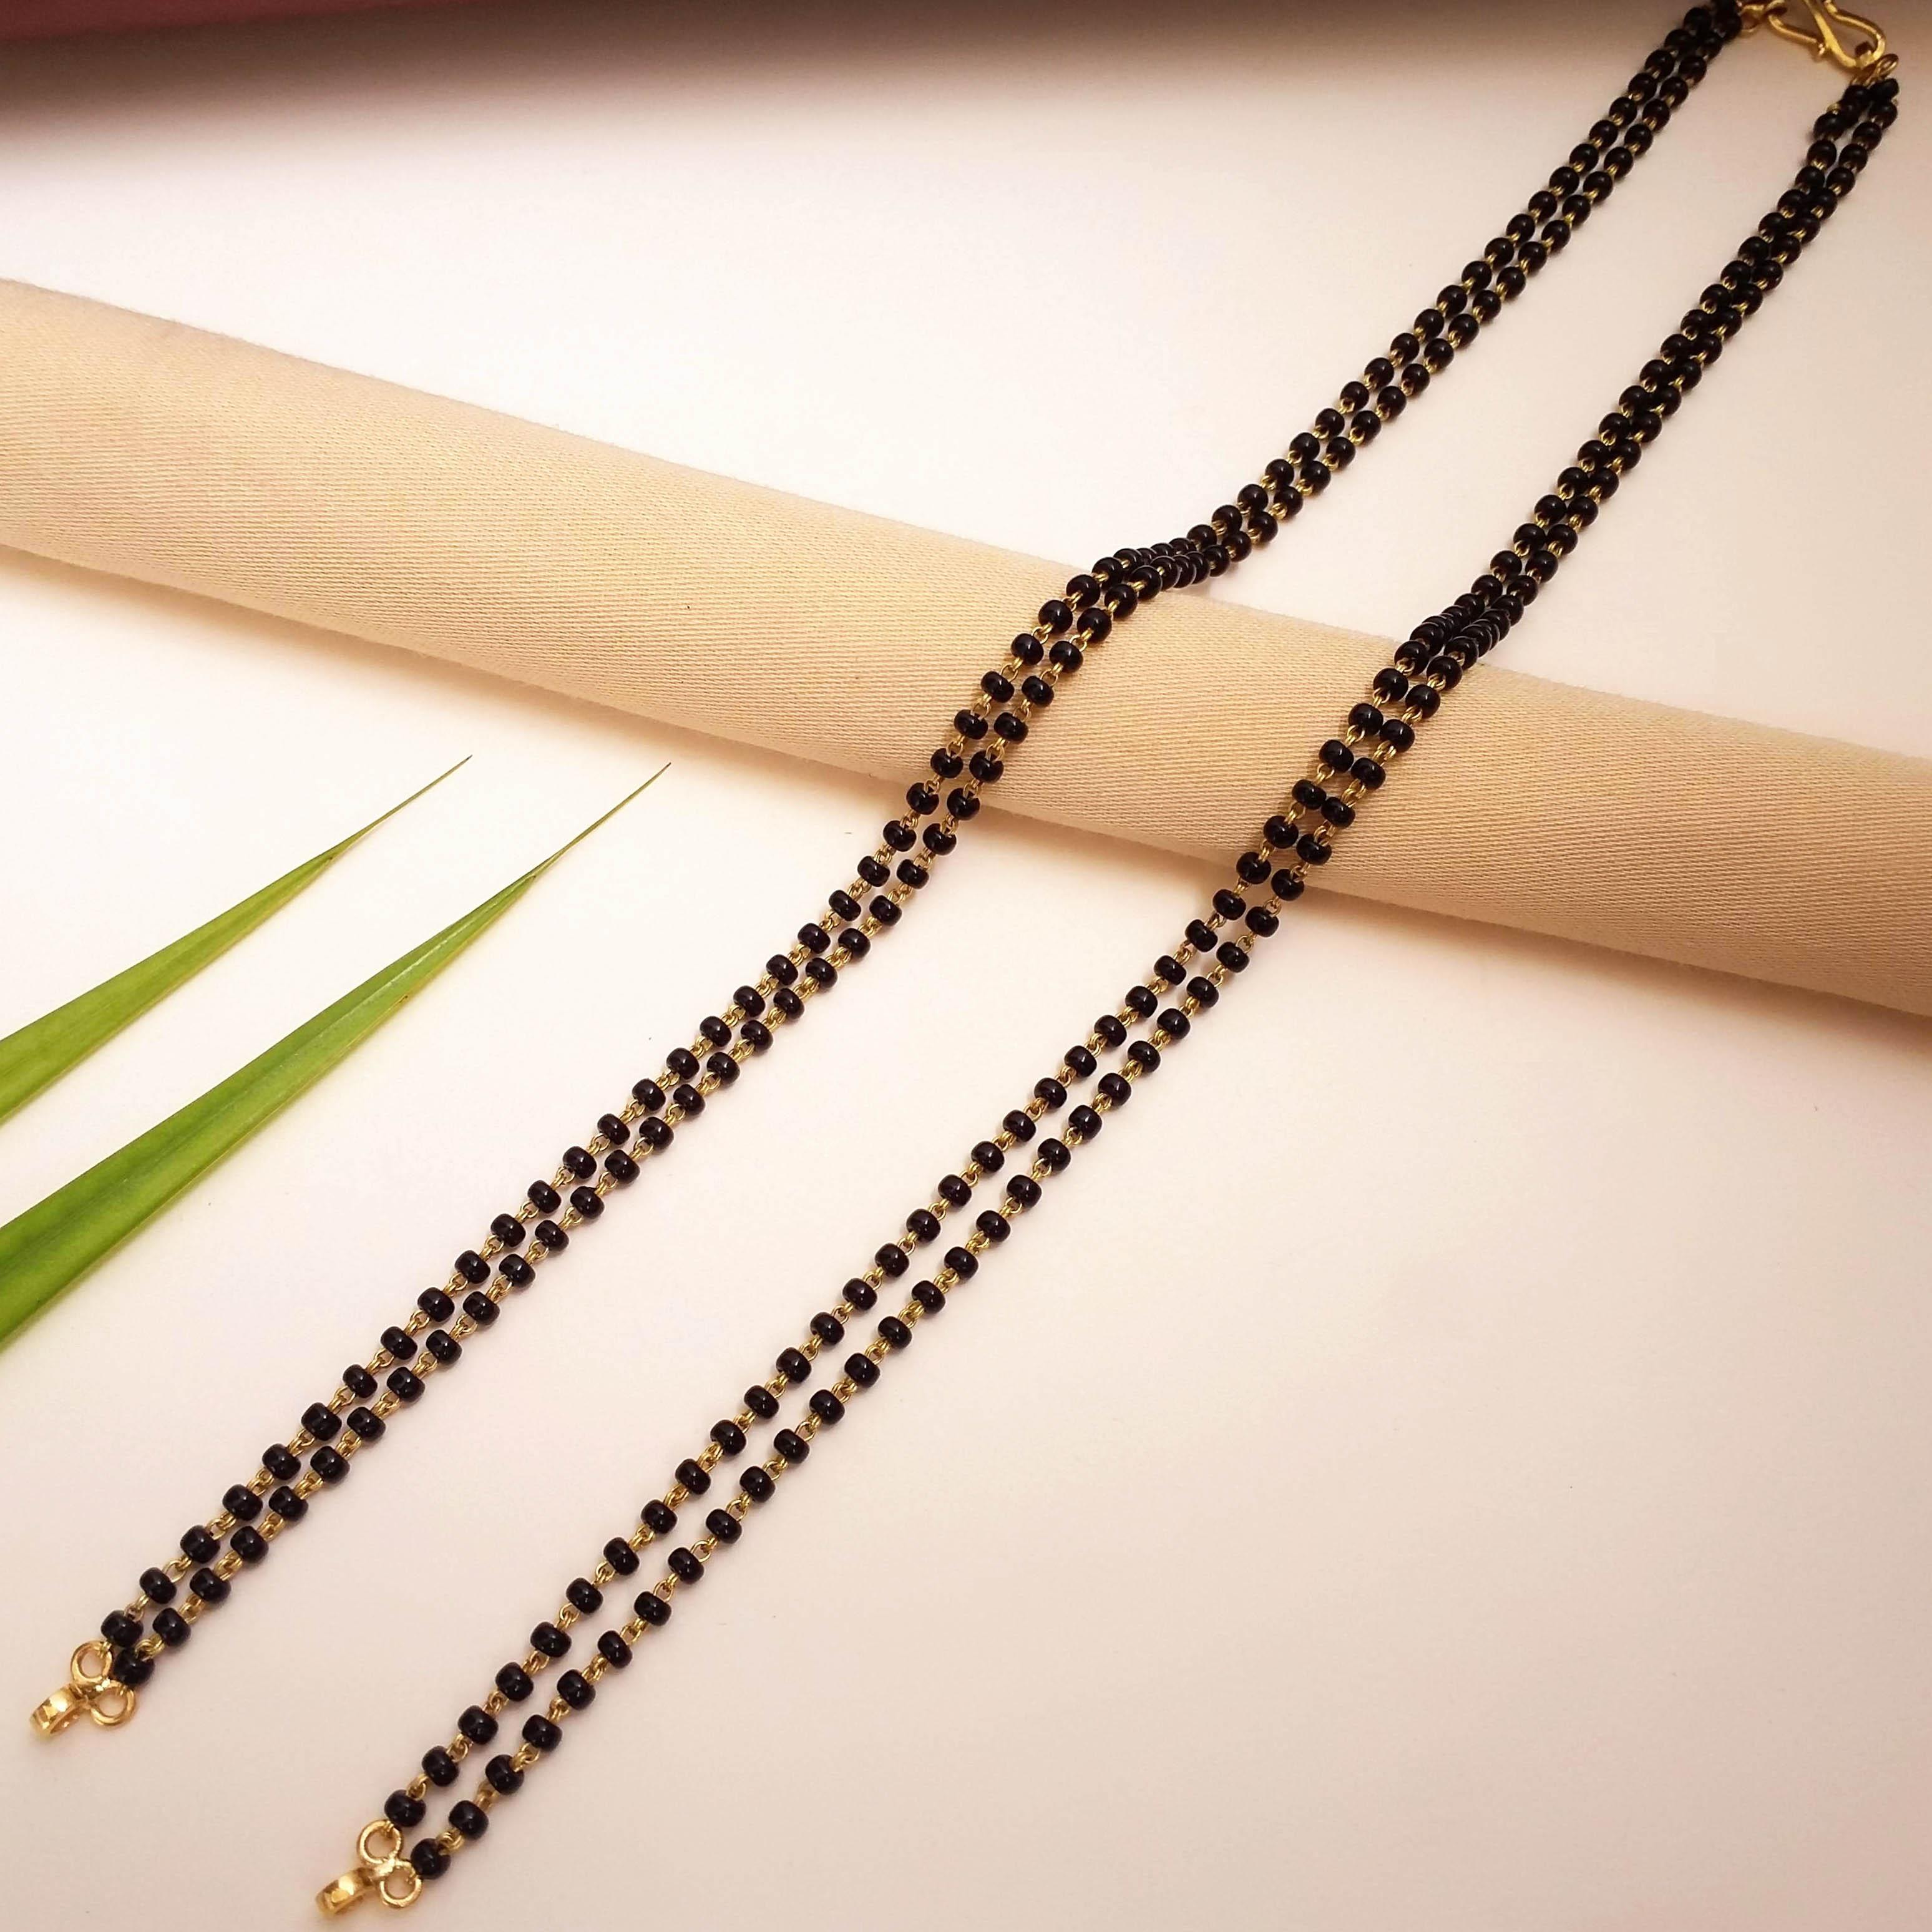 Buy Together Black Beads Gold Chain 18 KT yellow gold (5.26 gm).